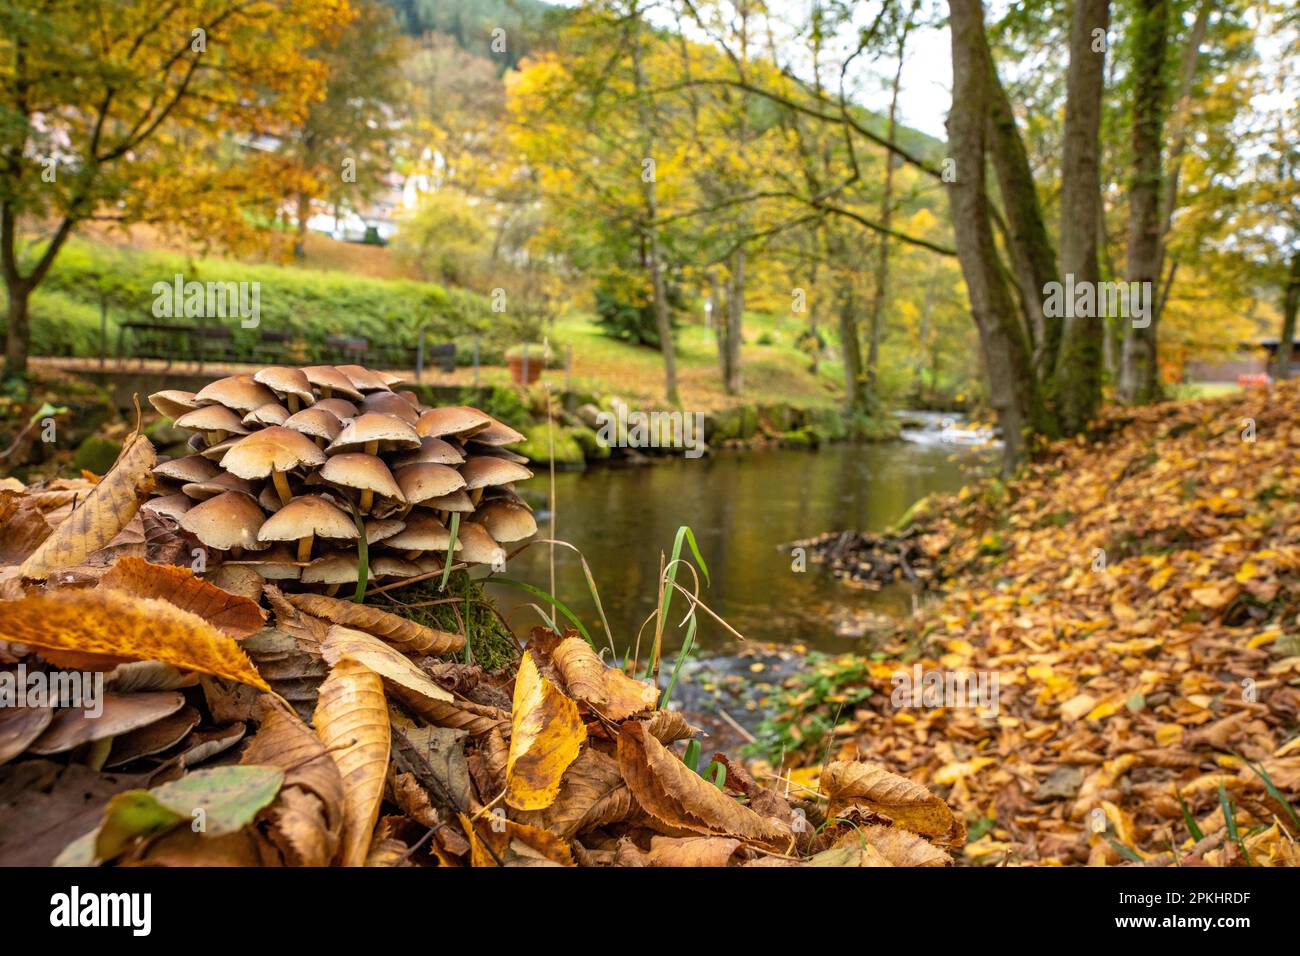 Mushrooms in autumn on river bank in spa garden, Bad Wildbad, Black Forest, Germany Stock Photo